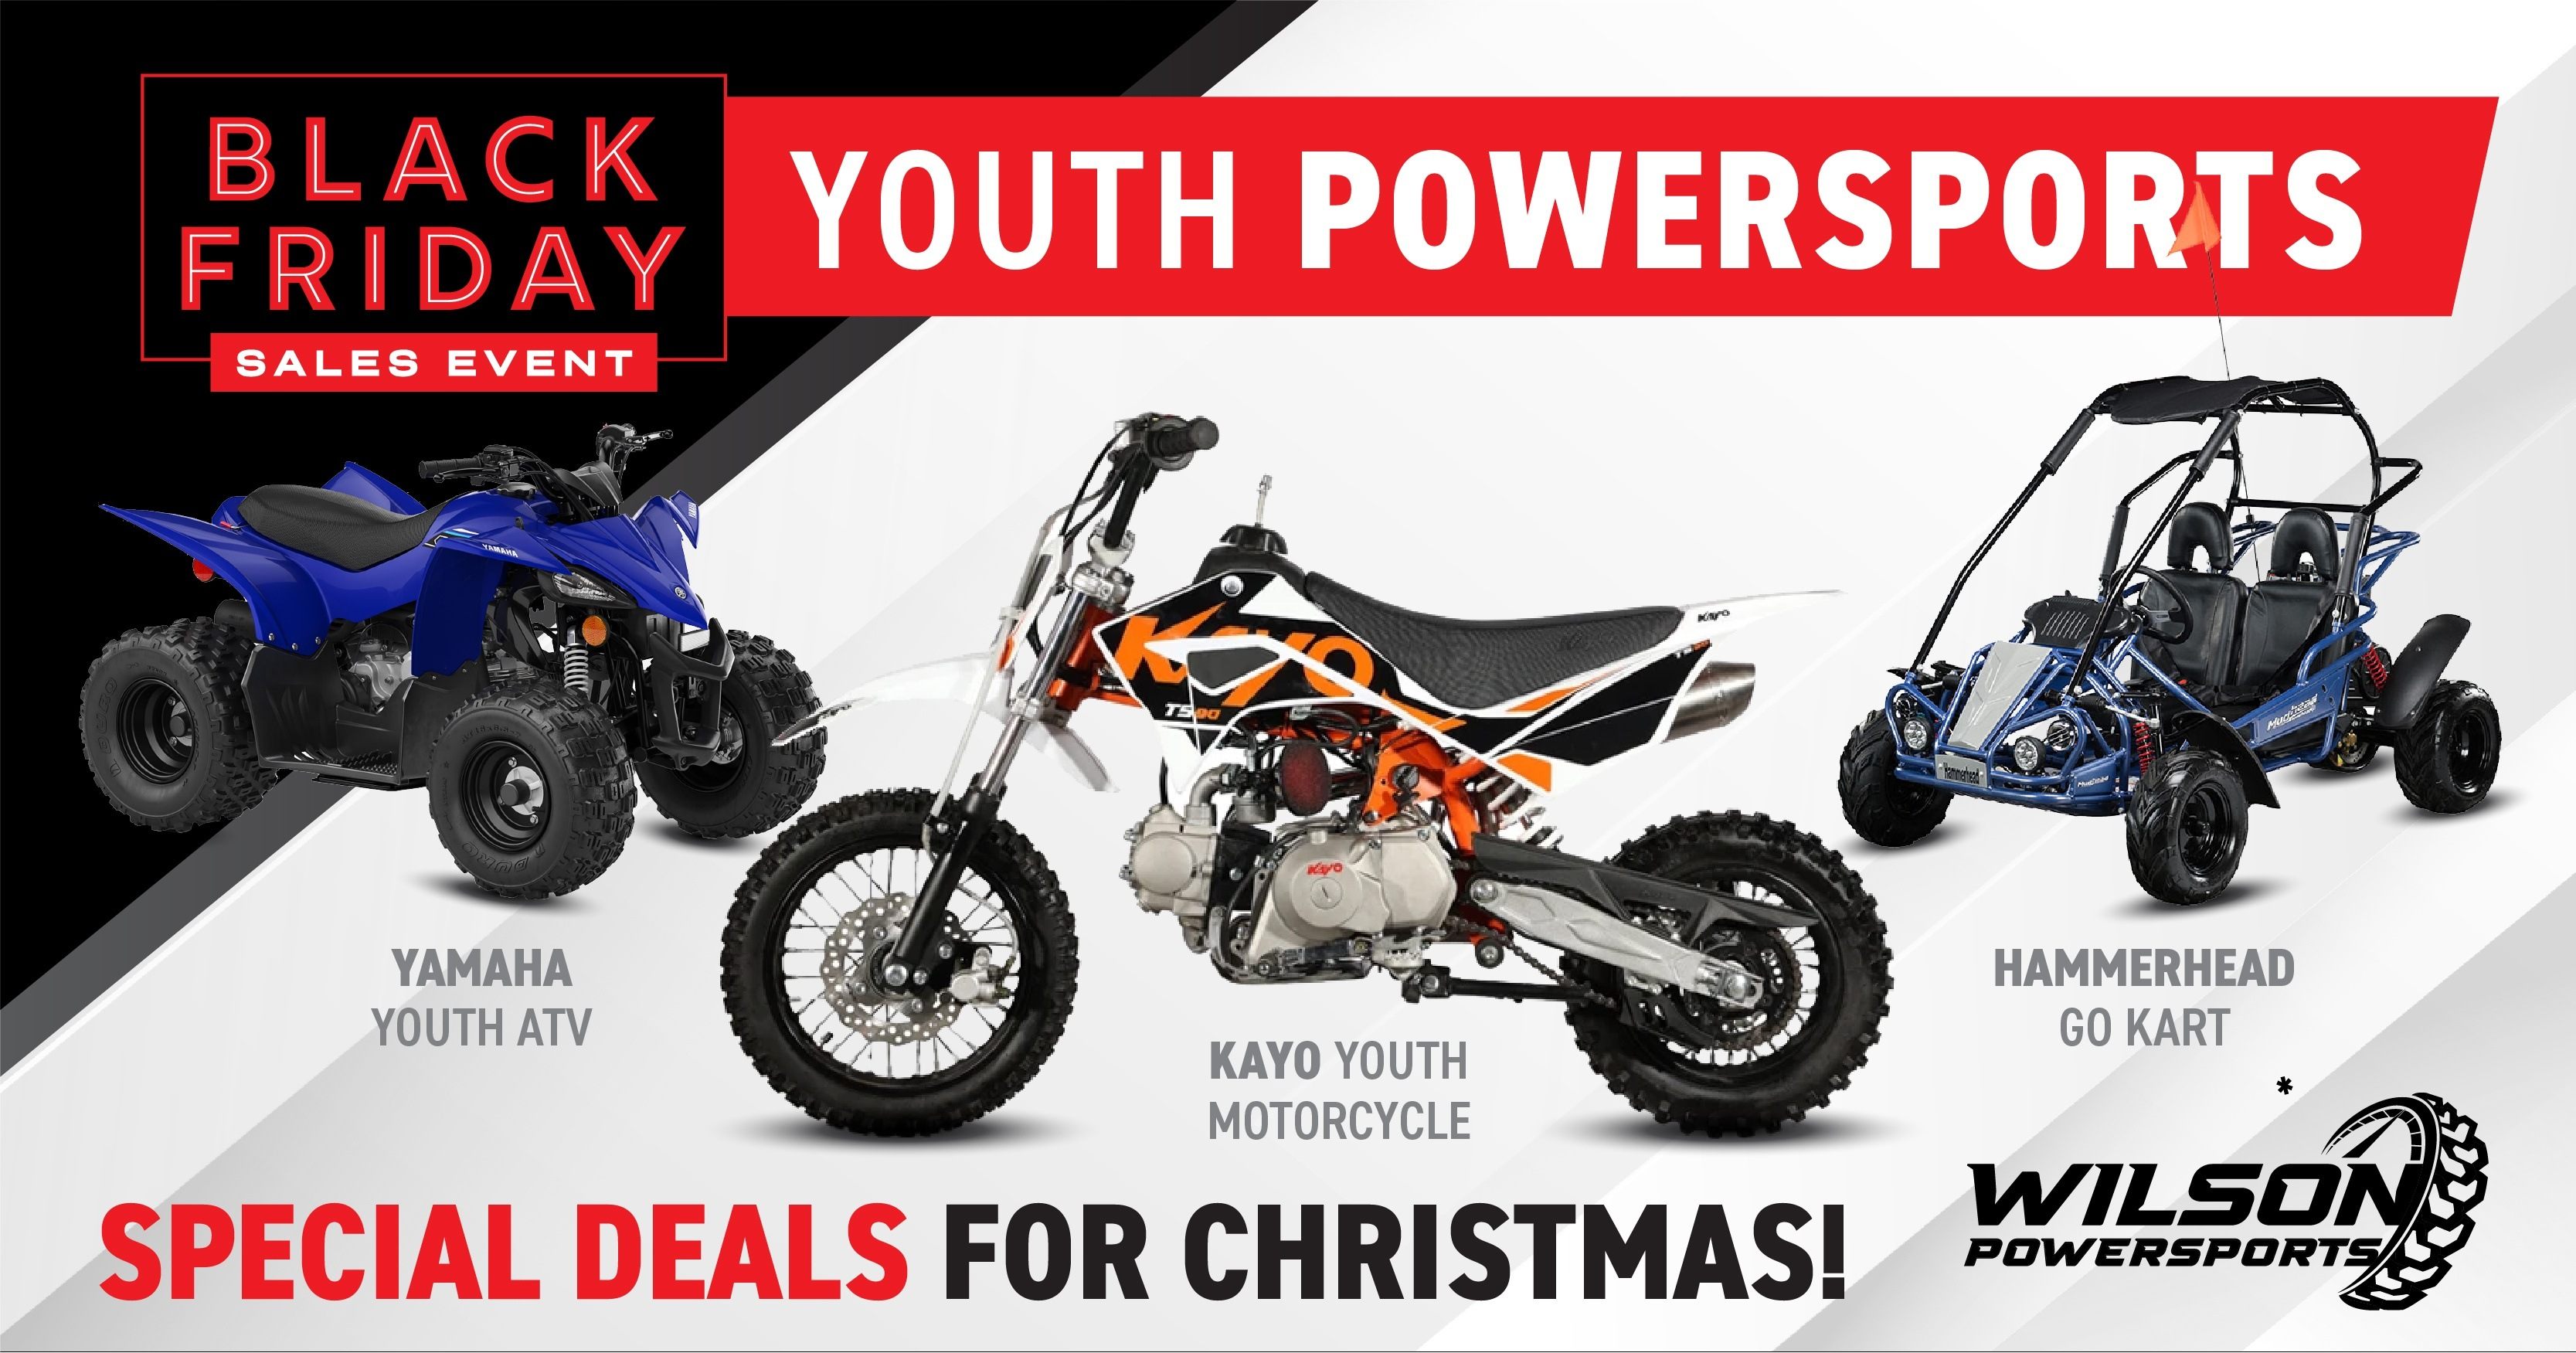 Wilson Powersports Black Friday Sale Special Deals on Youth Powersports for Christmas